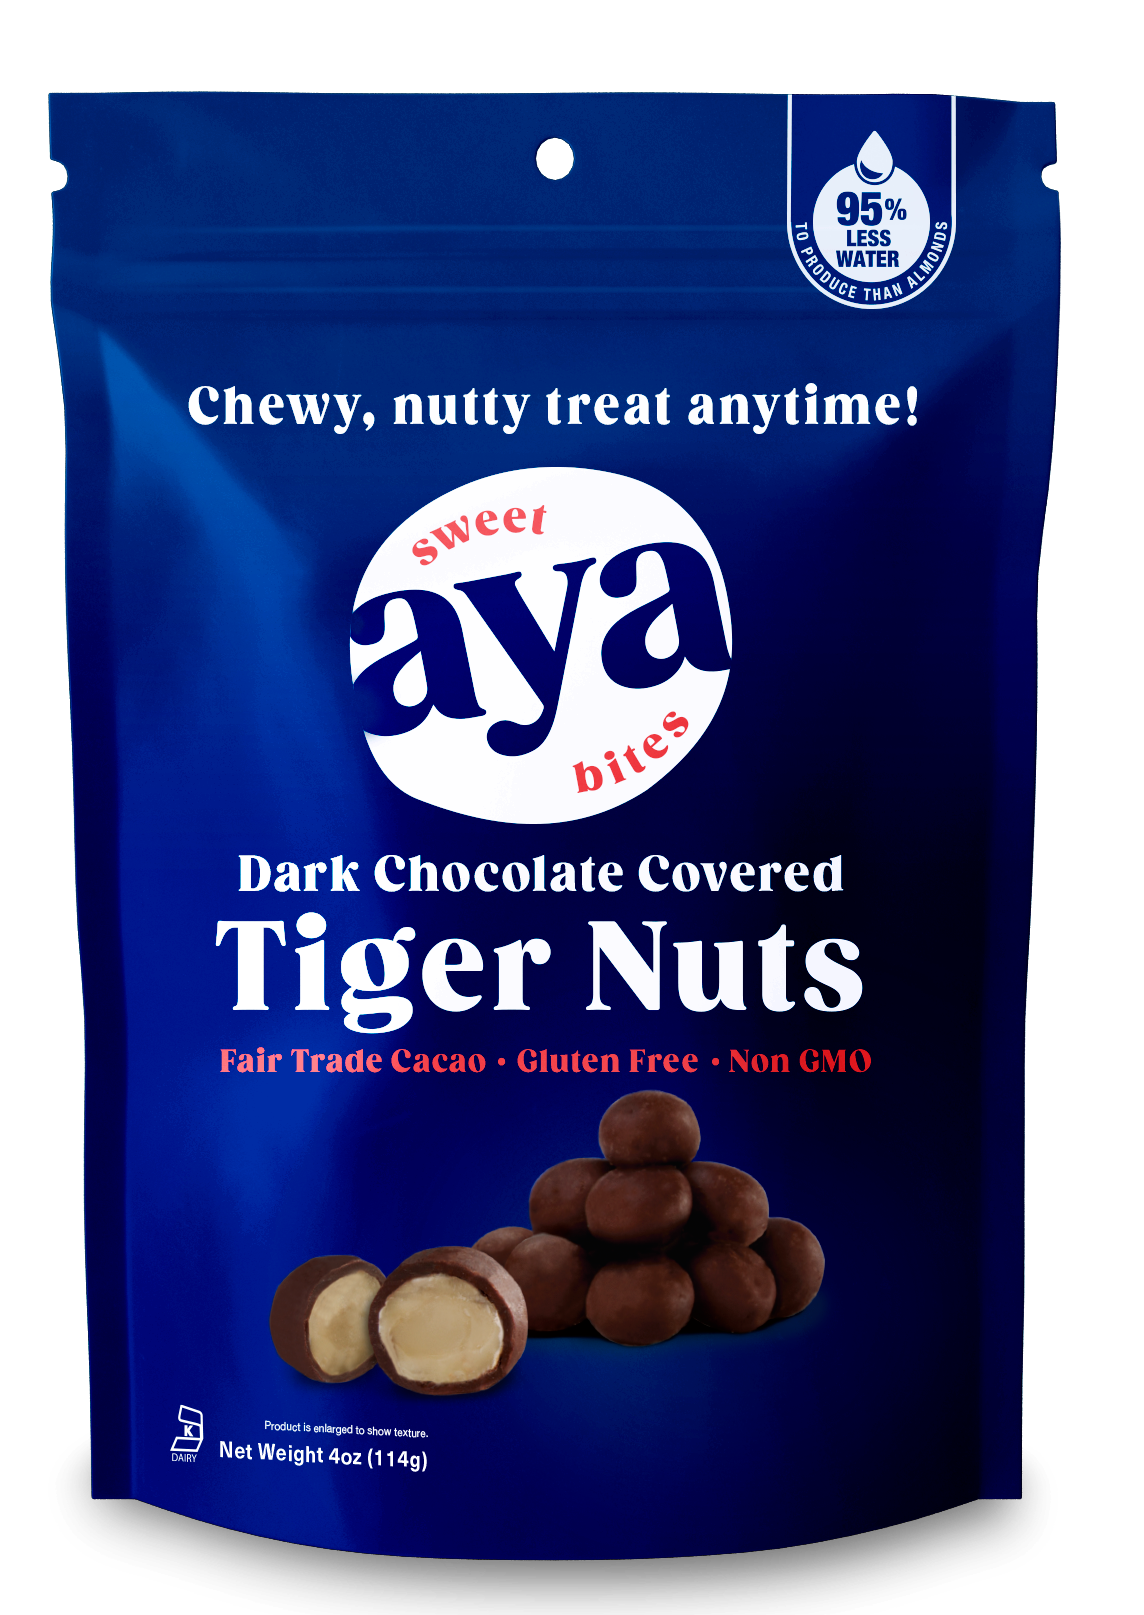 Dark chocolate-covered sweet aya bites tiger nuts healthy, low-calorie, low-fat snack food